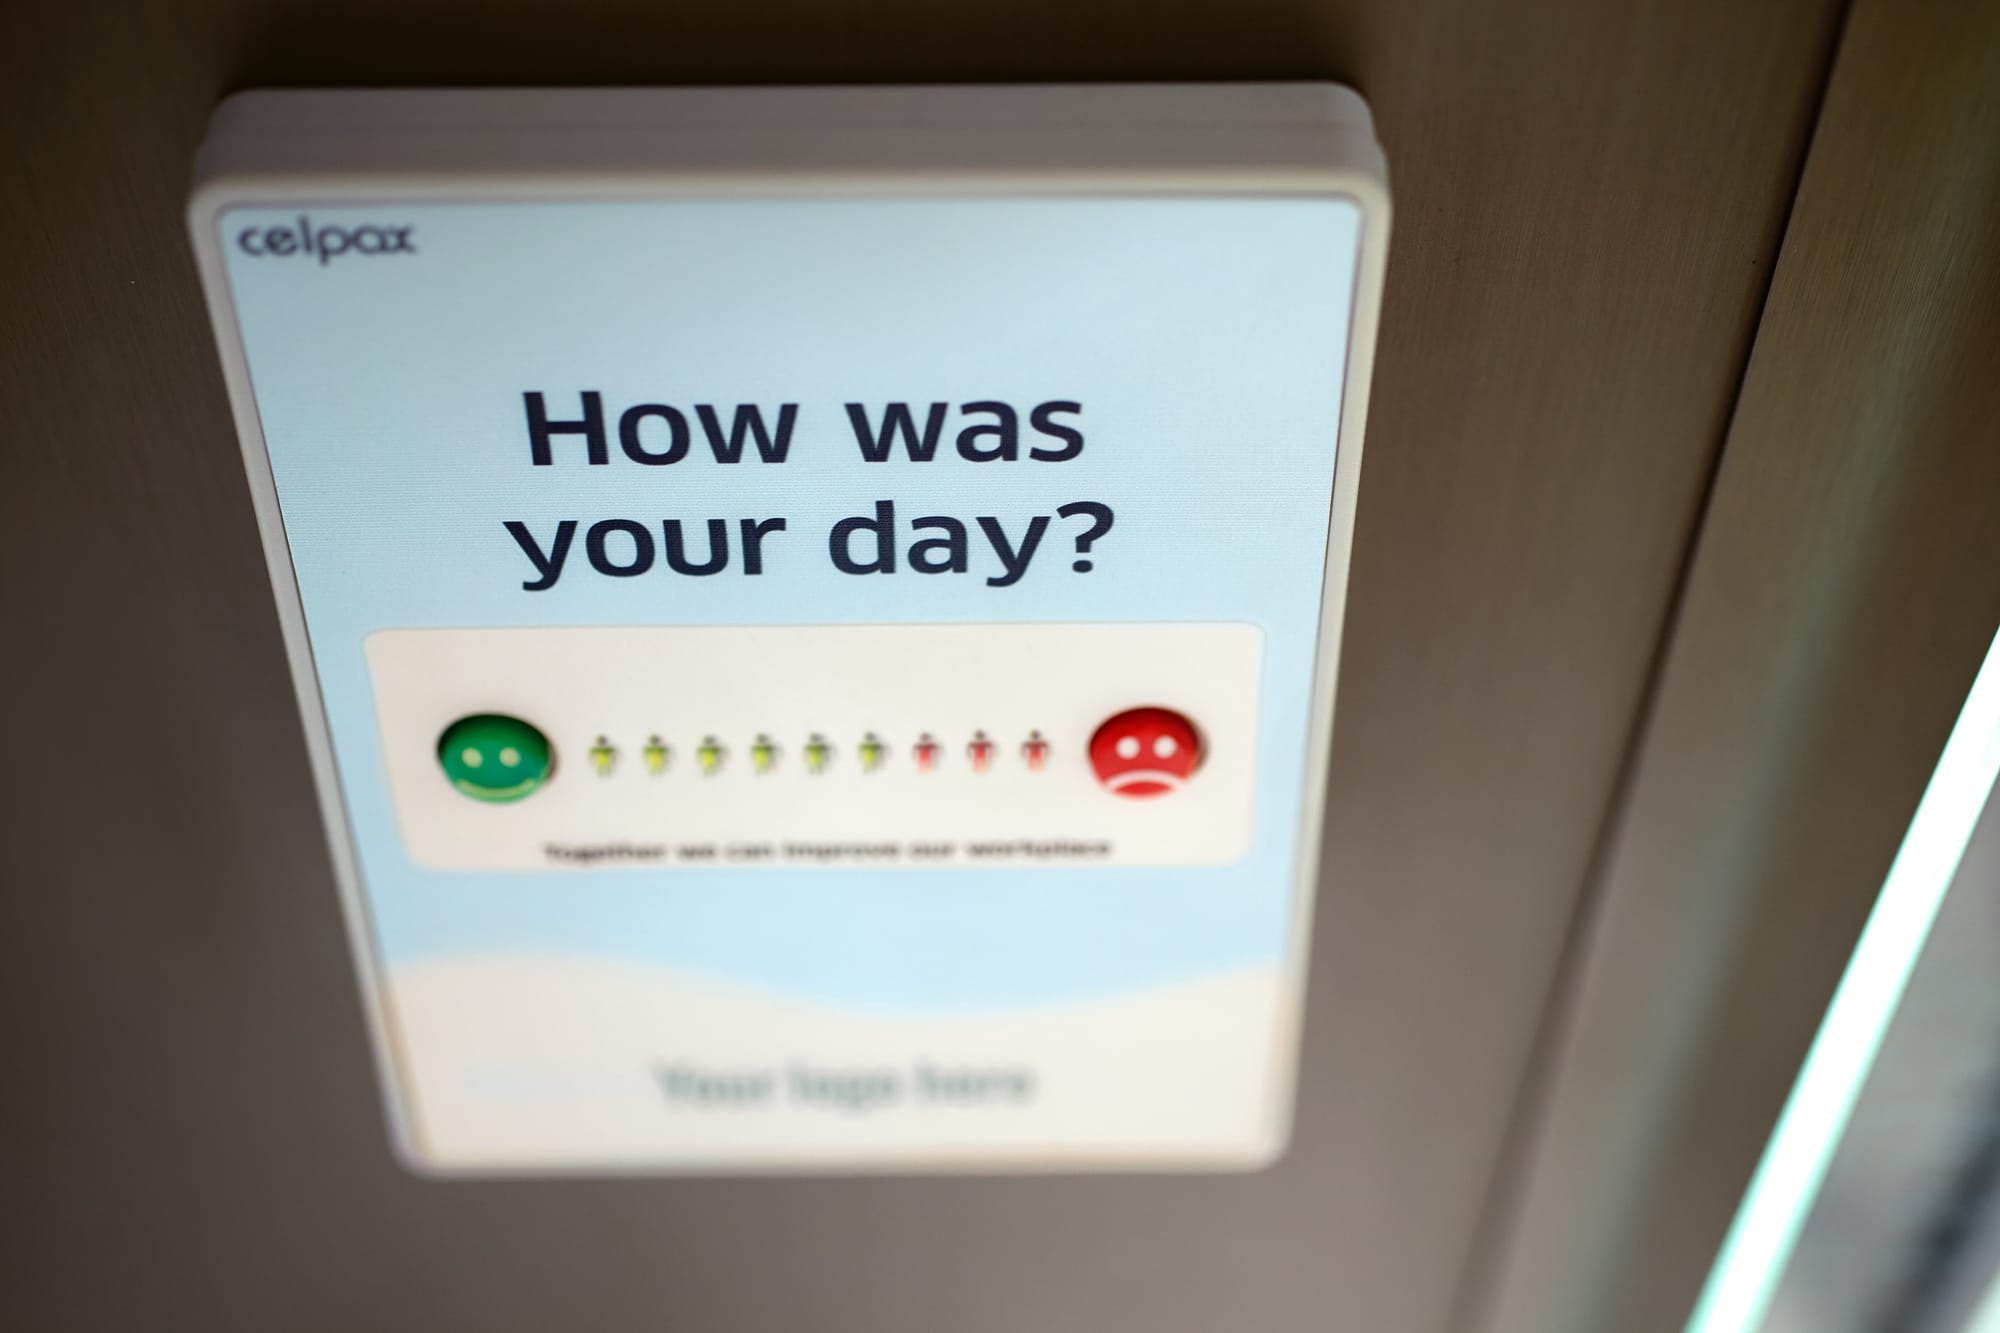 A pop-up asking how your day is.